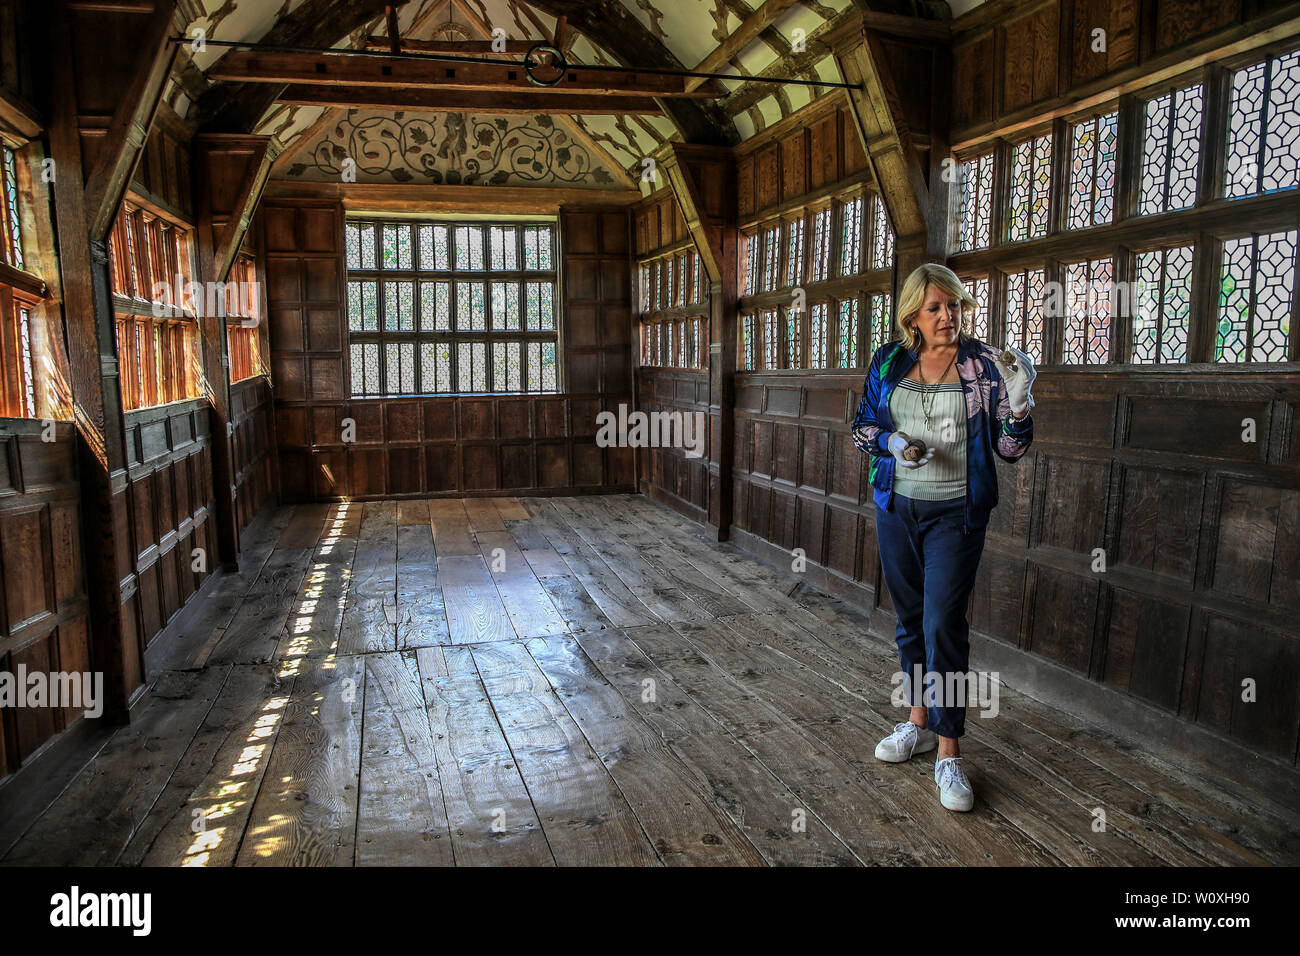 Artist Hilary Jack was inspired to create a new artwork with Tudor tennis balls, found by the National Trust over recent years behind panelling at Little Moreton Hall in Cheshire. Stock Photo